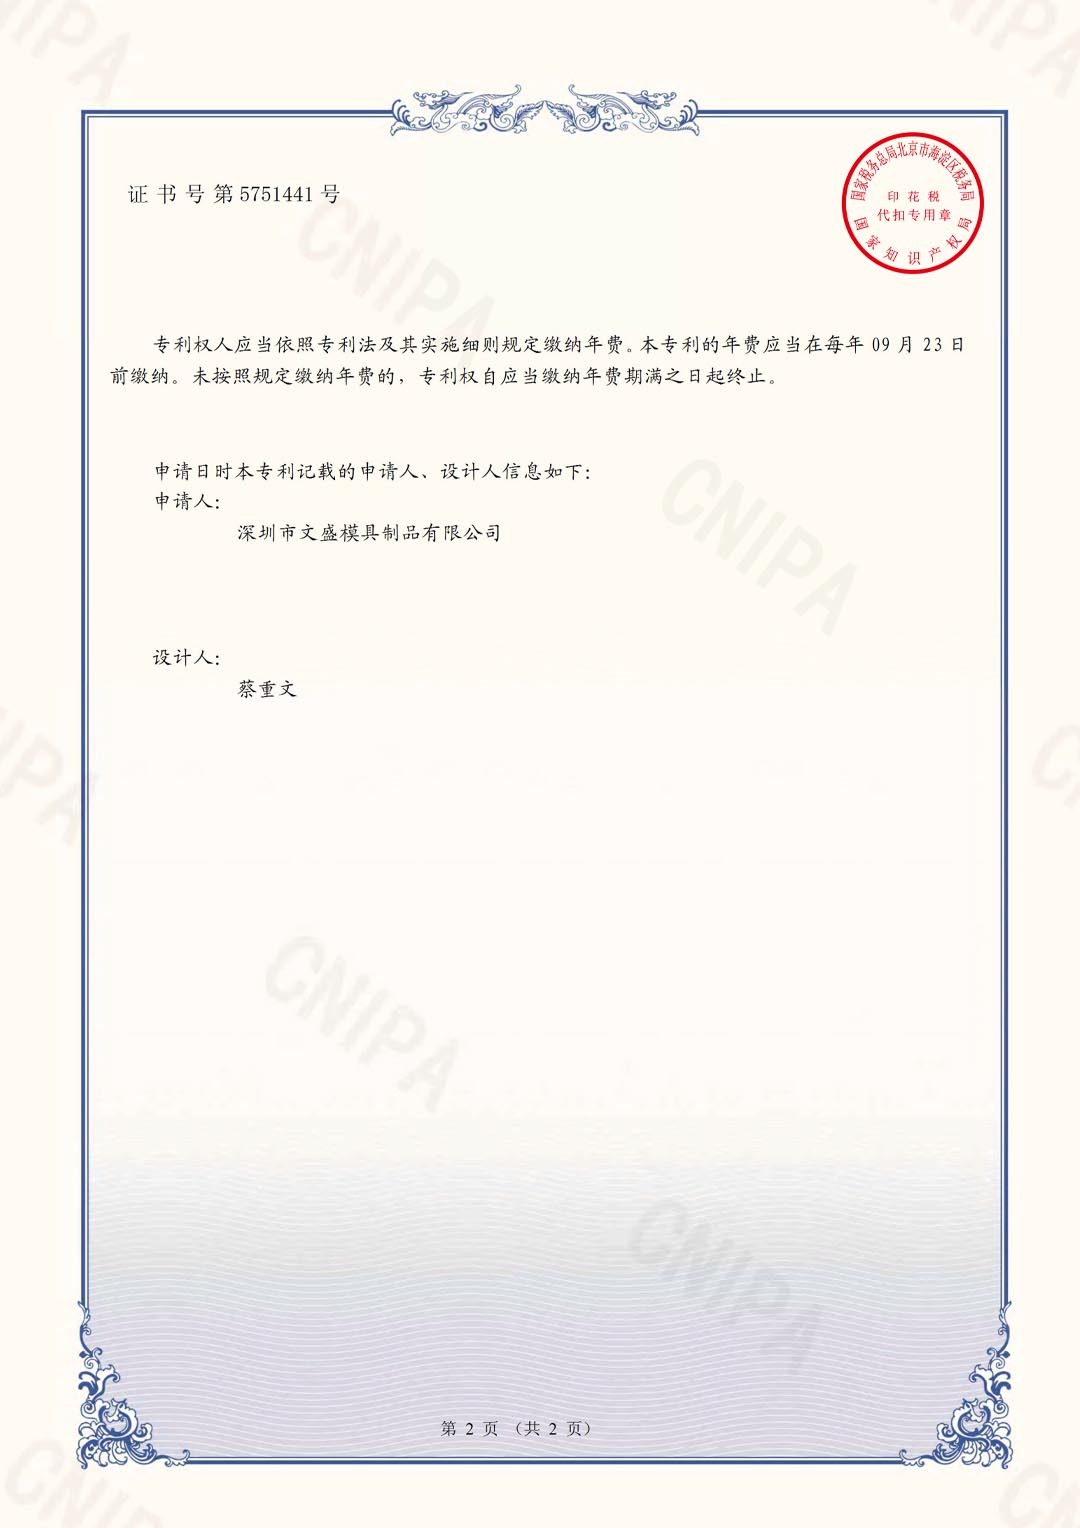 Appearance Special Certificate FS-20-2019.9.23(2)